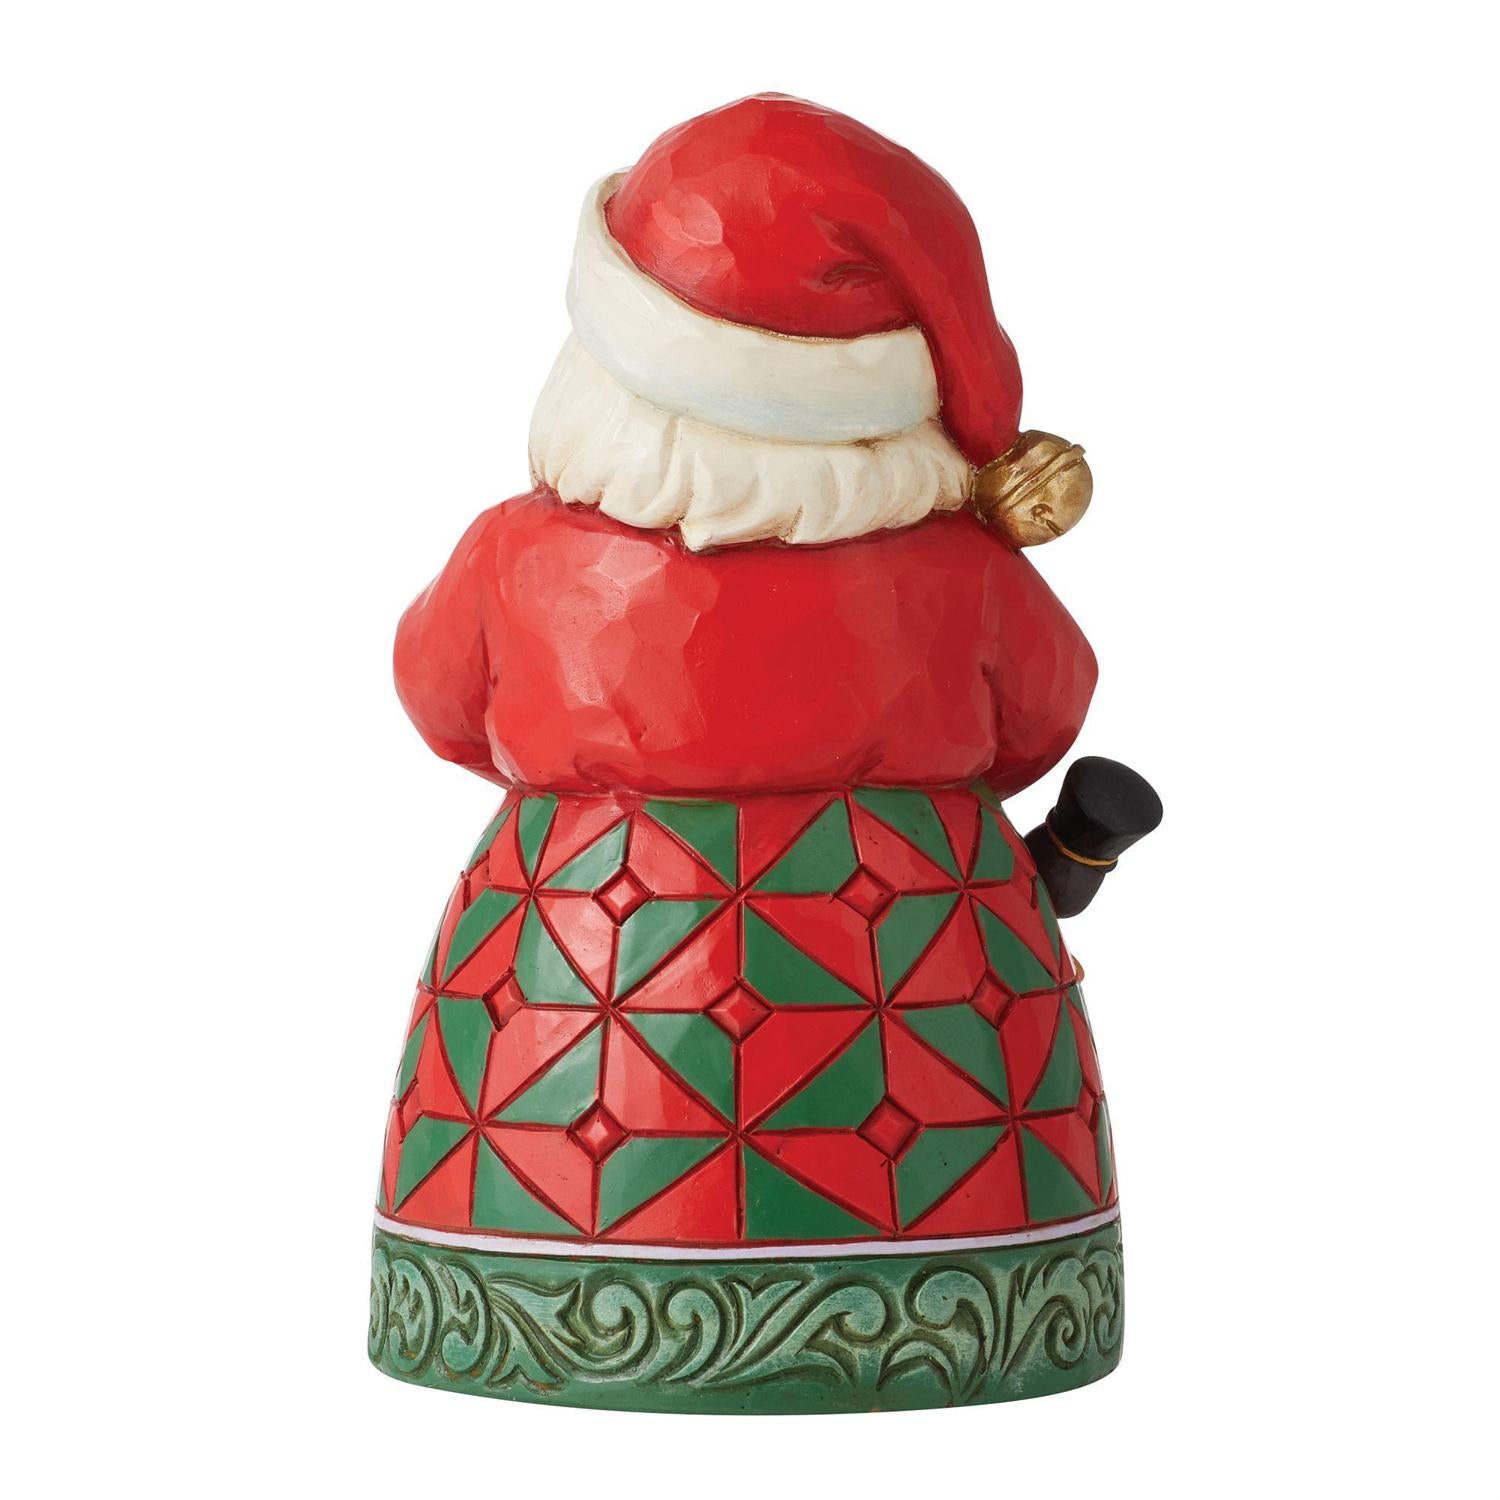 Pint Sized Santa with Gifts - Lake Norman Gifts